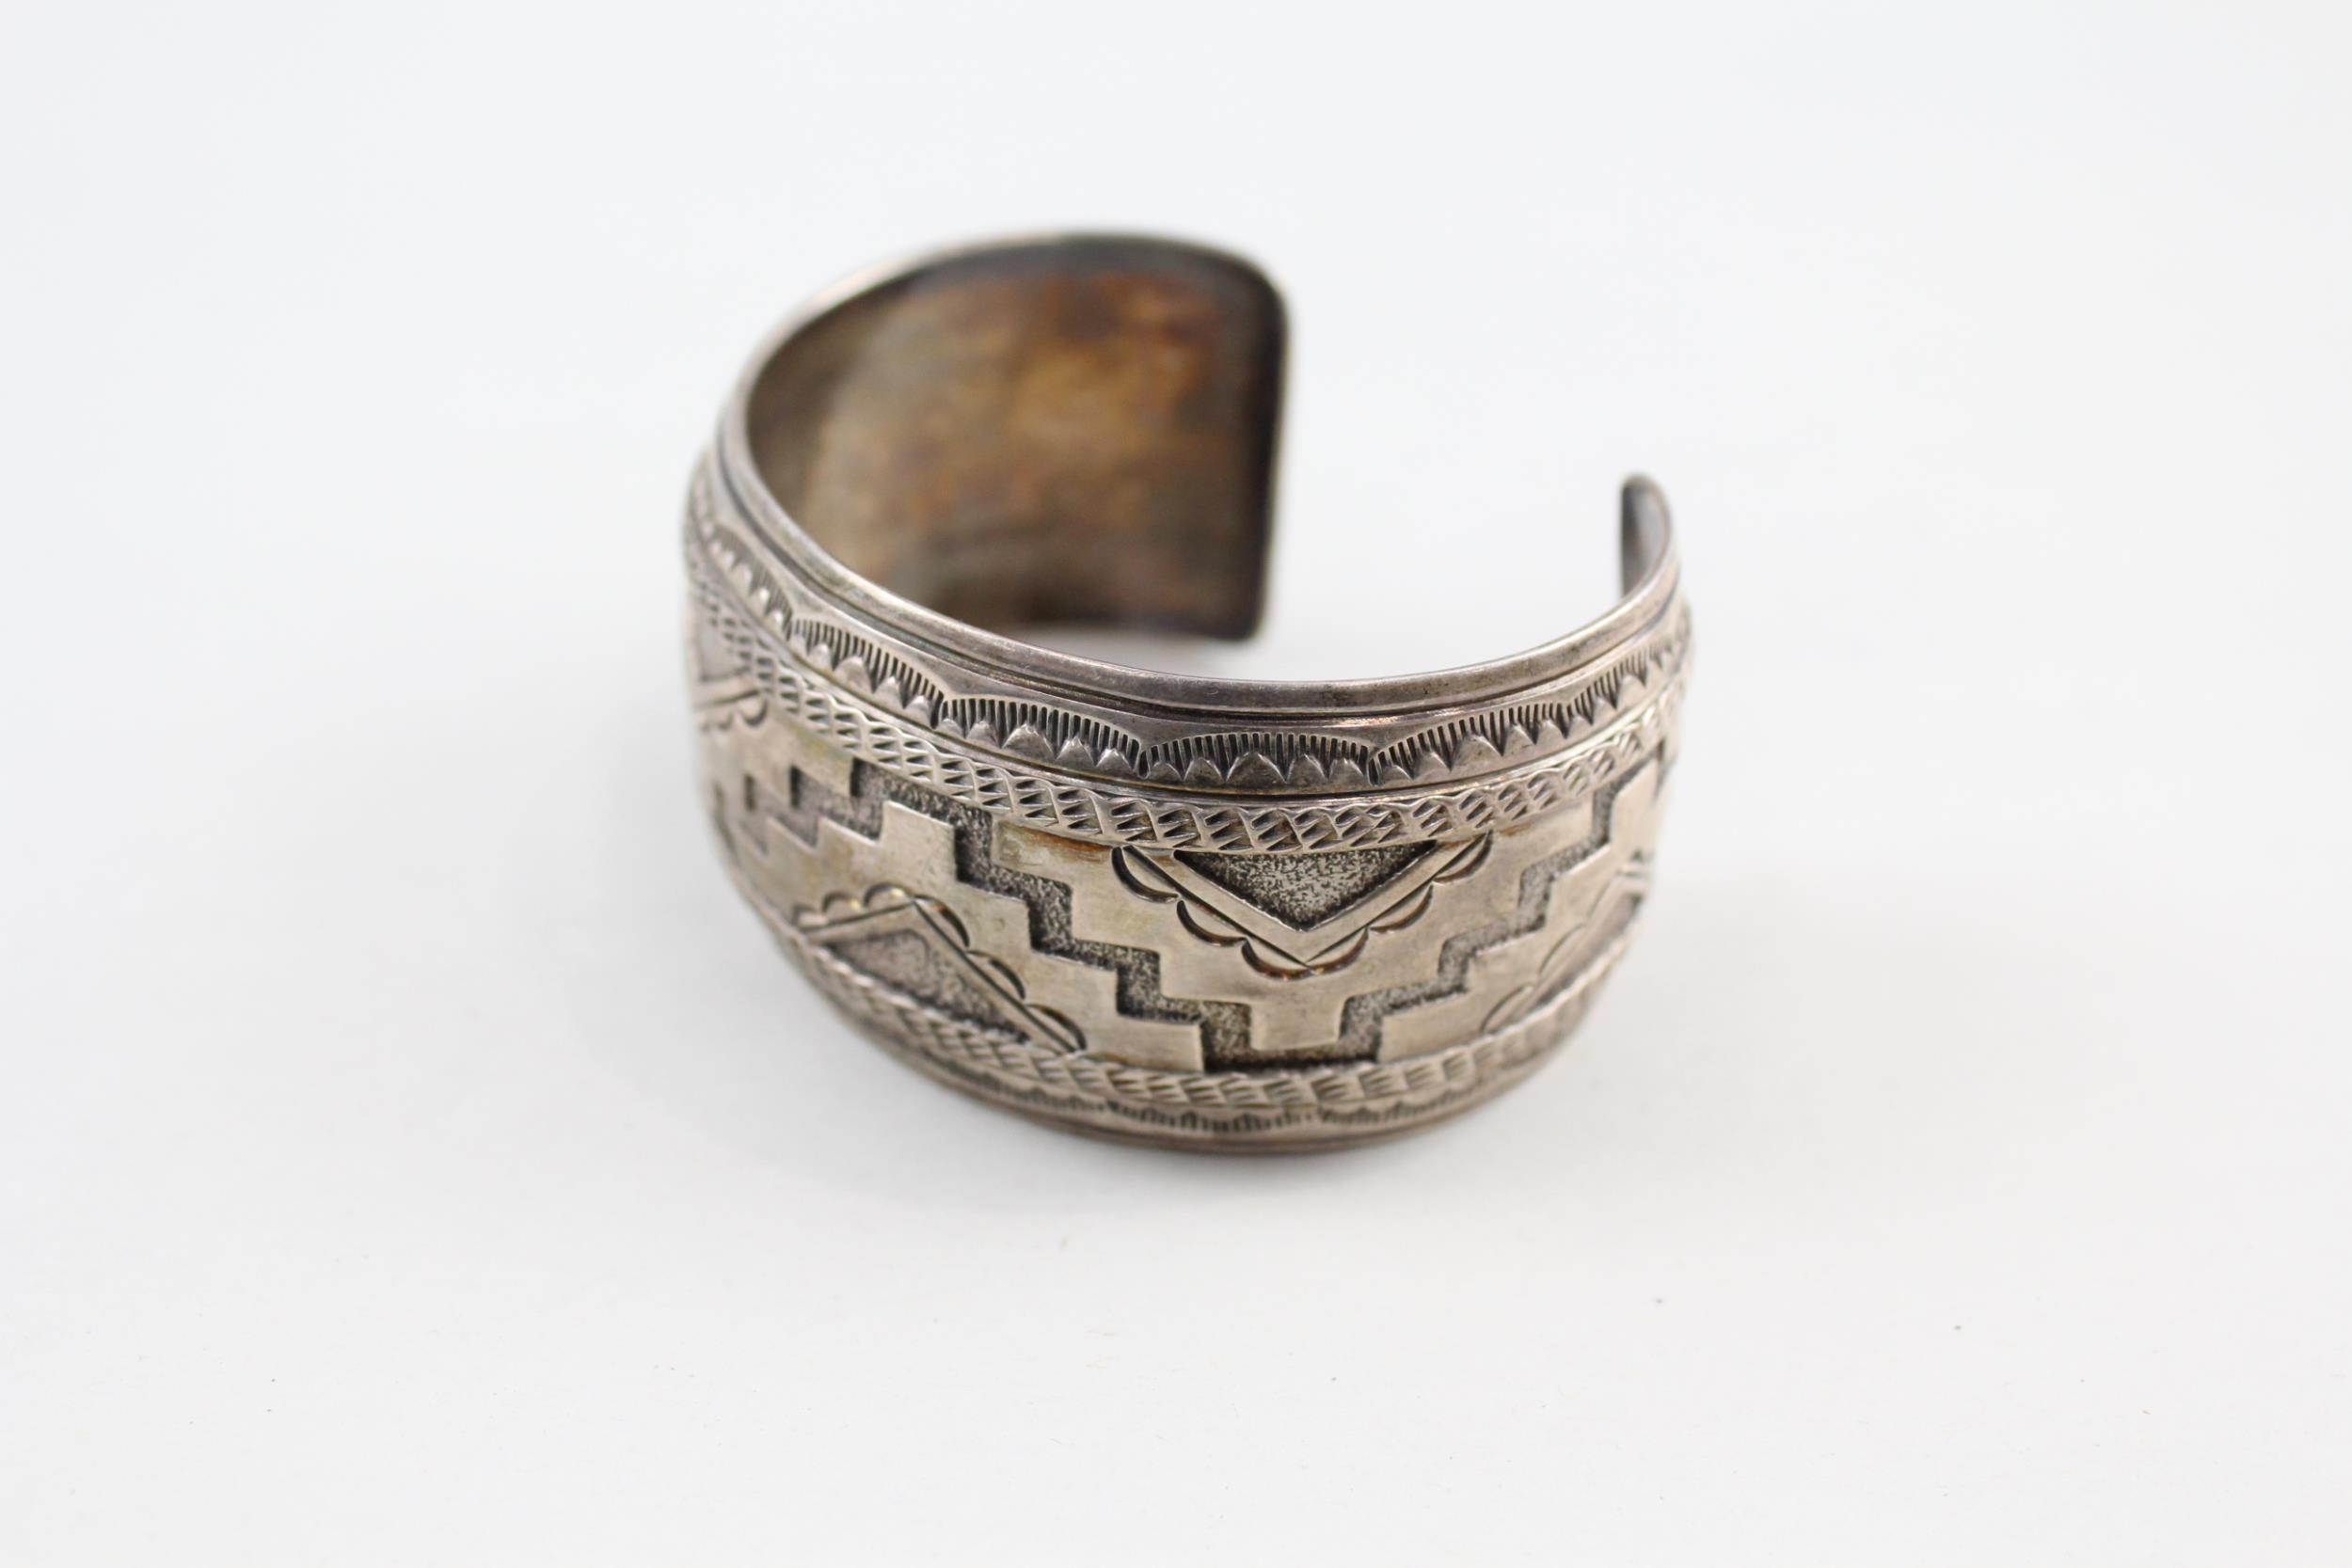 Silver Navajo bangle signed R. Wylie (55g) - Image 2 of 6